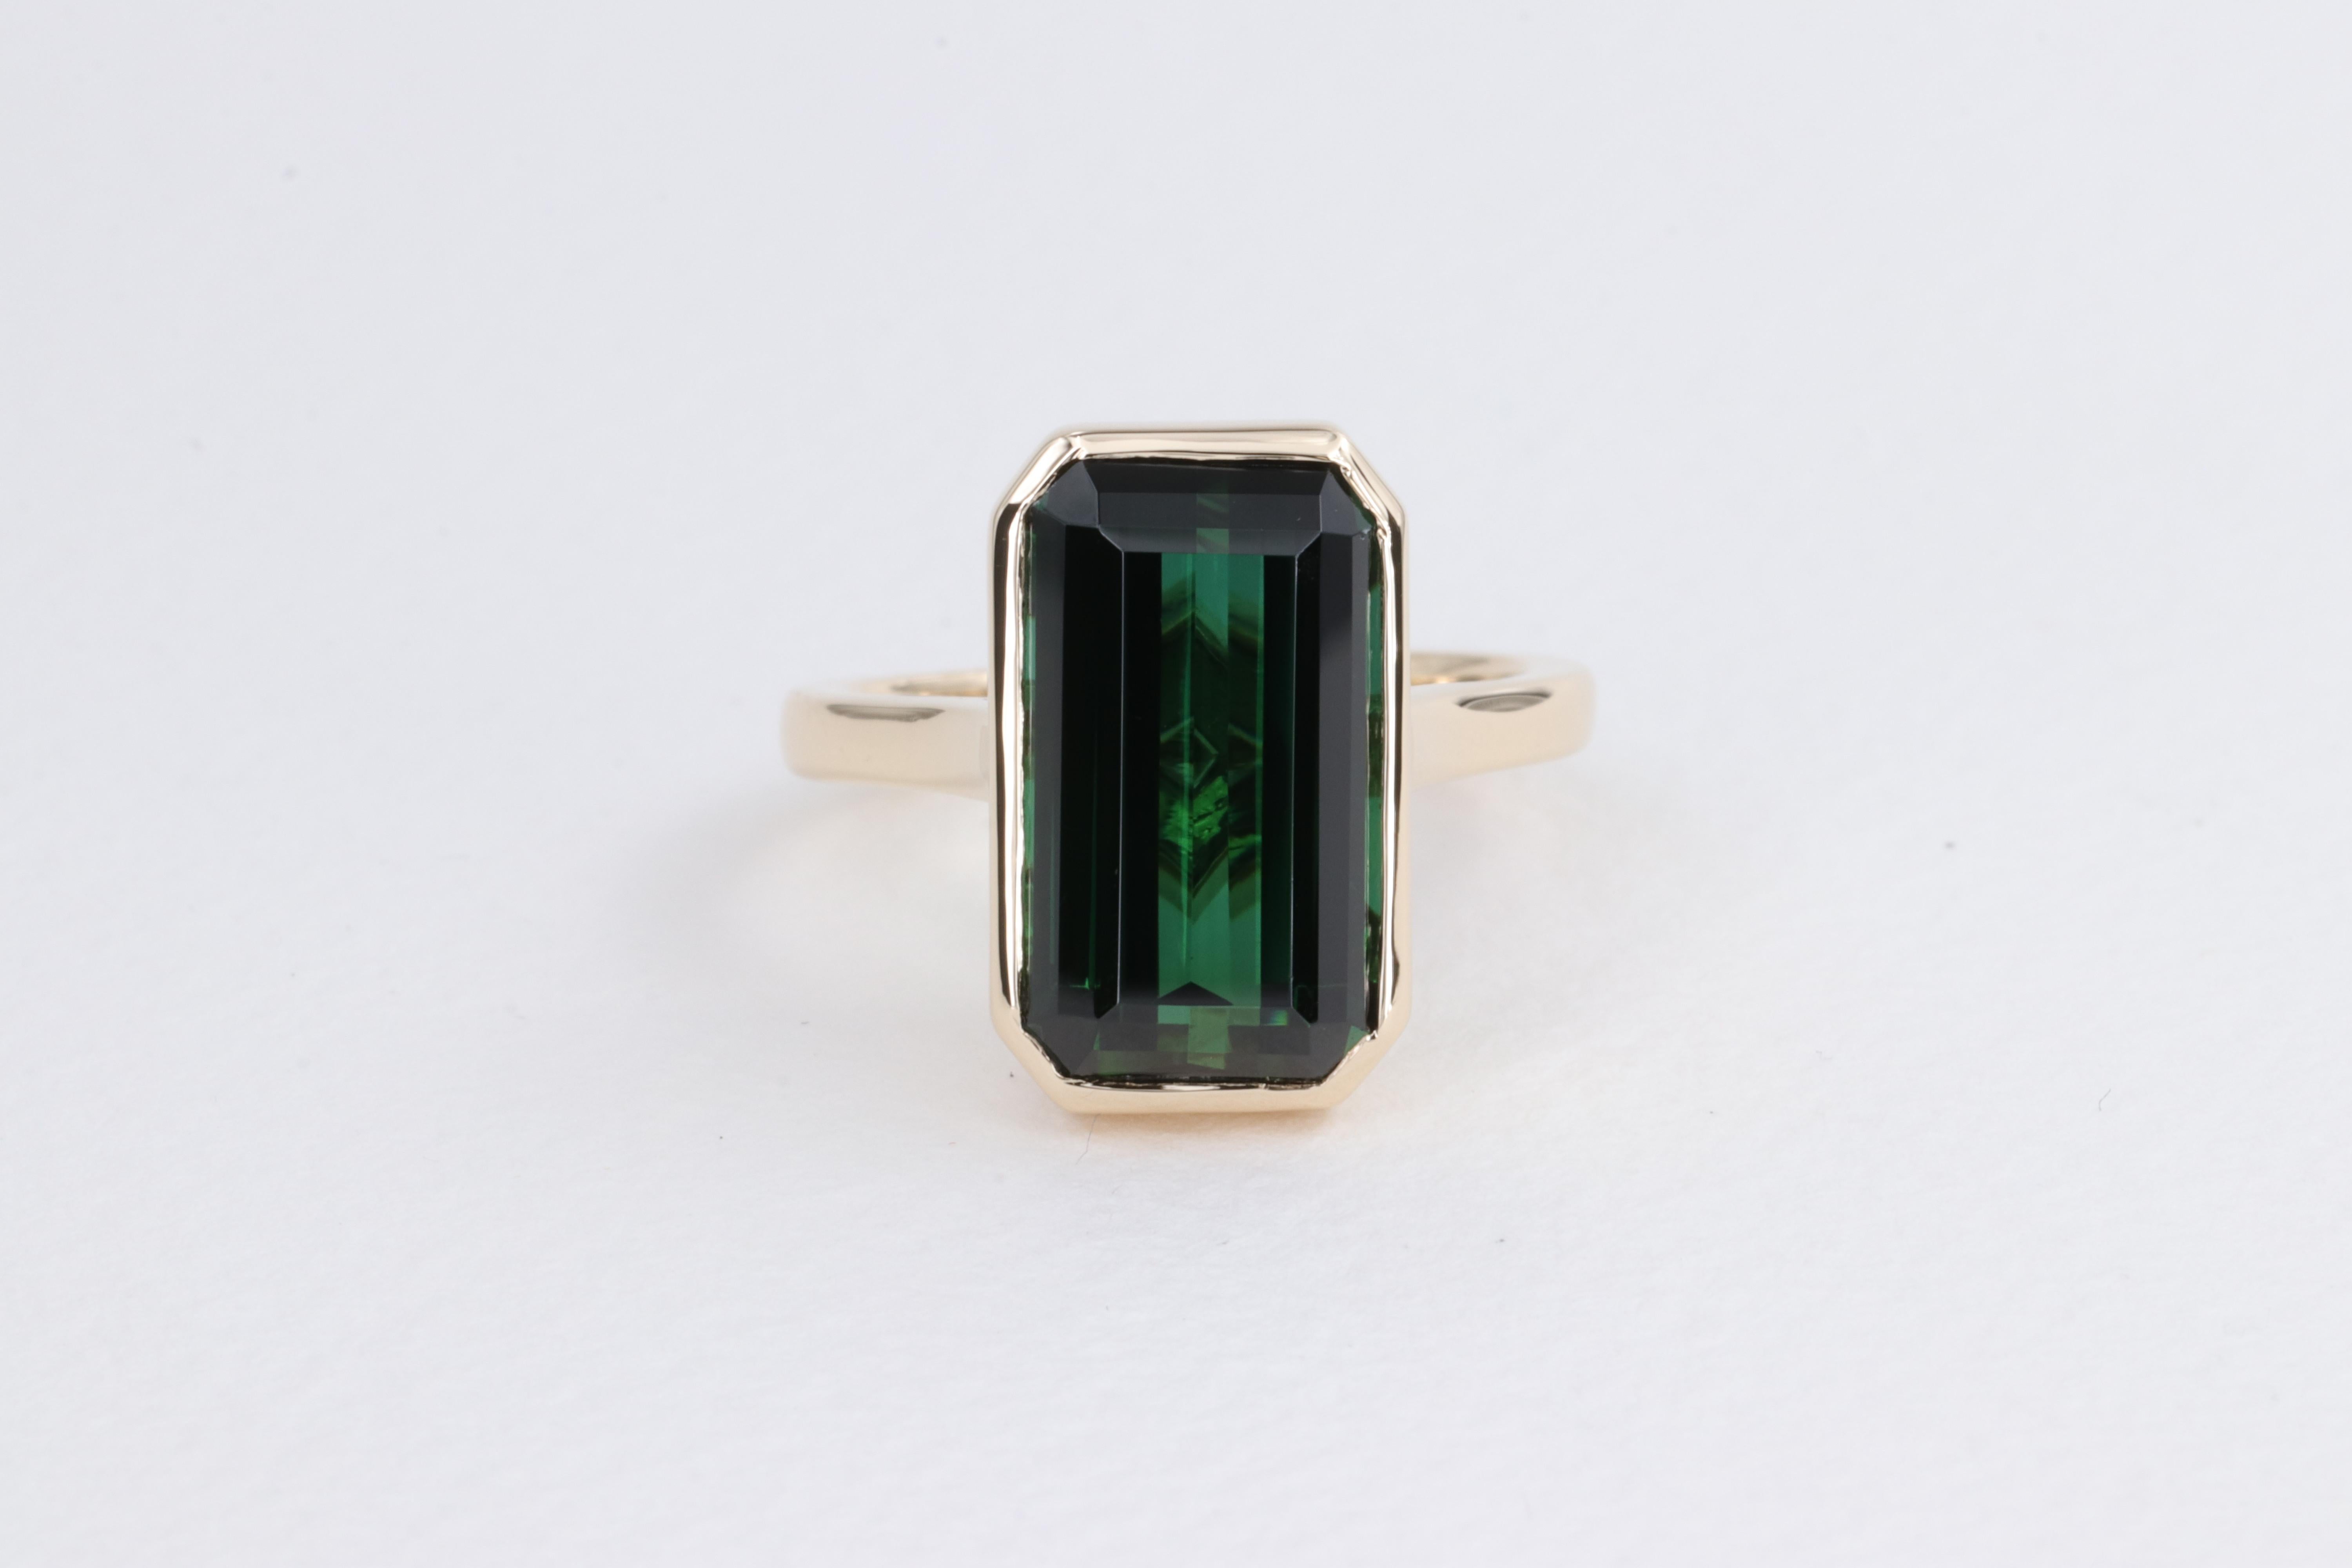 6.78 Carat Green Tourmaline Emerald Cut Bezel Set Yellow Gold Ring In New Condition For Sale In Tampa, FL